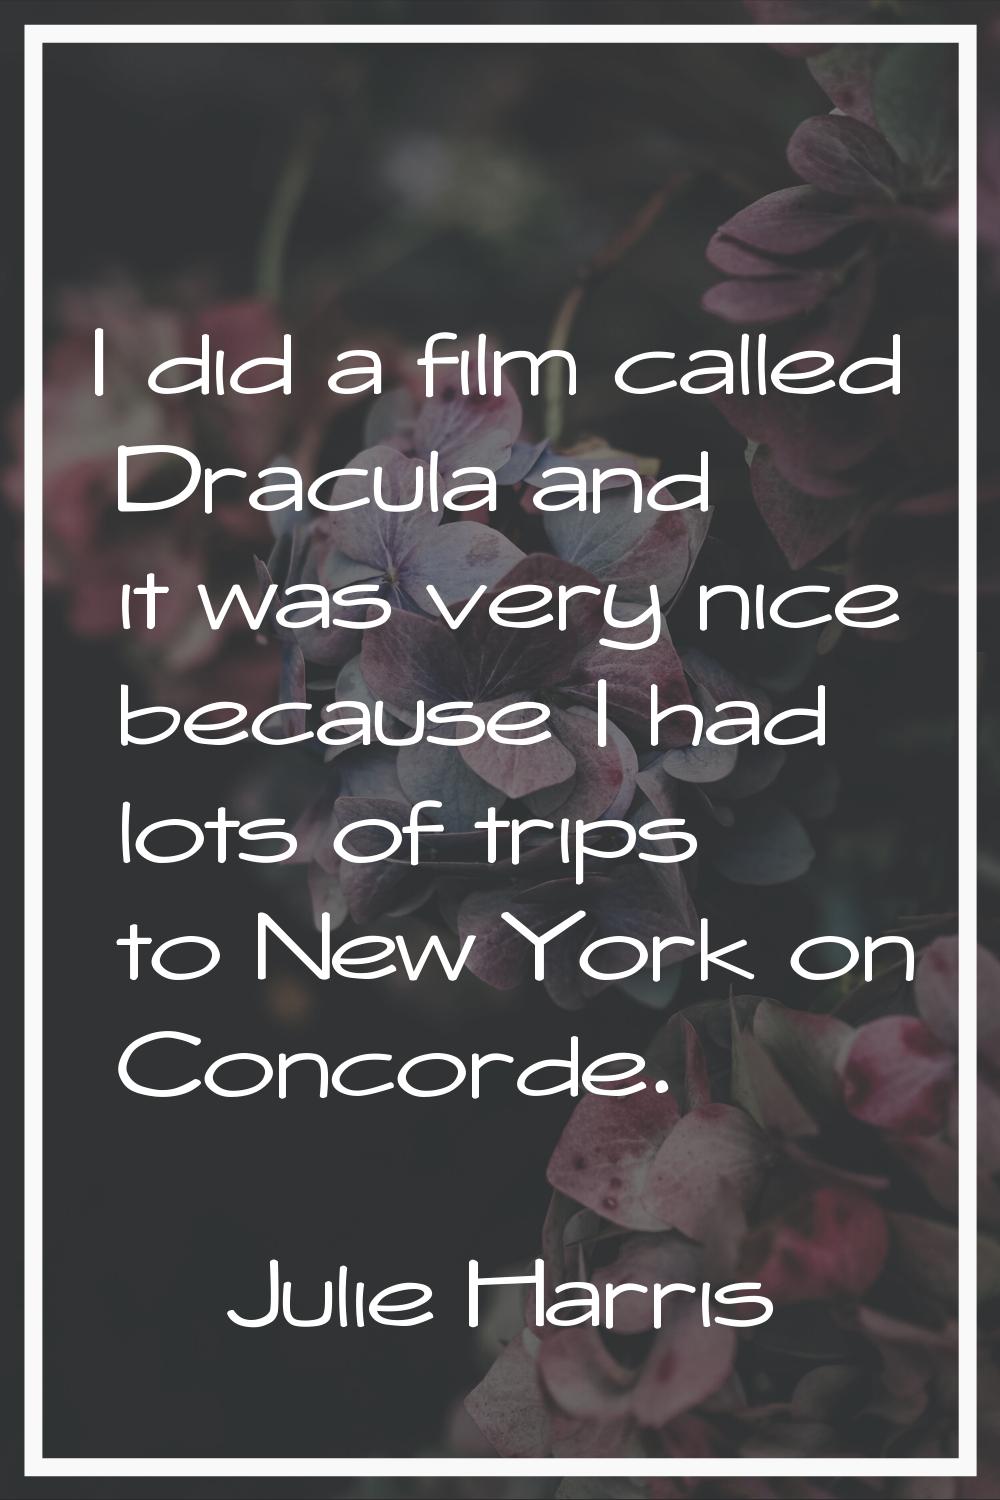 I did a film called Dracula and it was very nice because I had lots of trips to New York on Concord